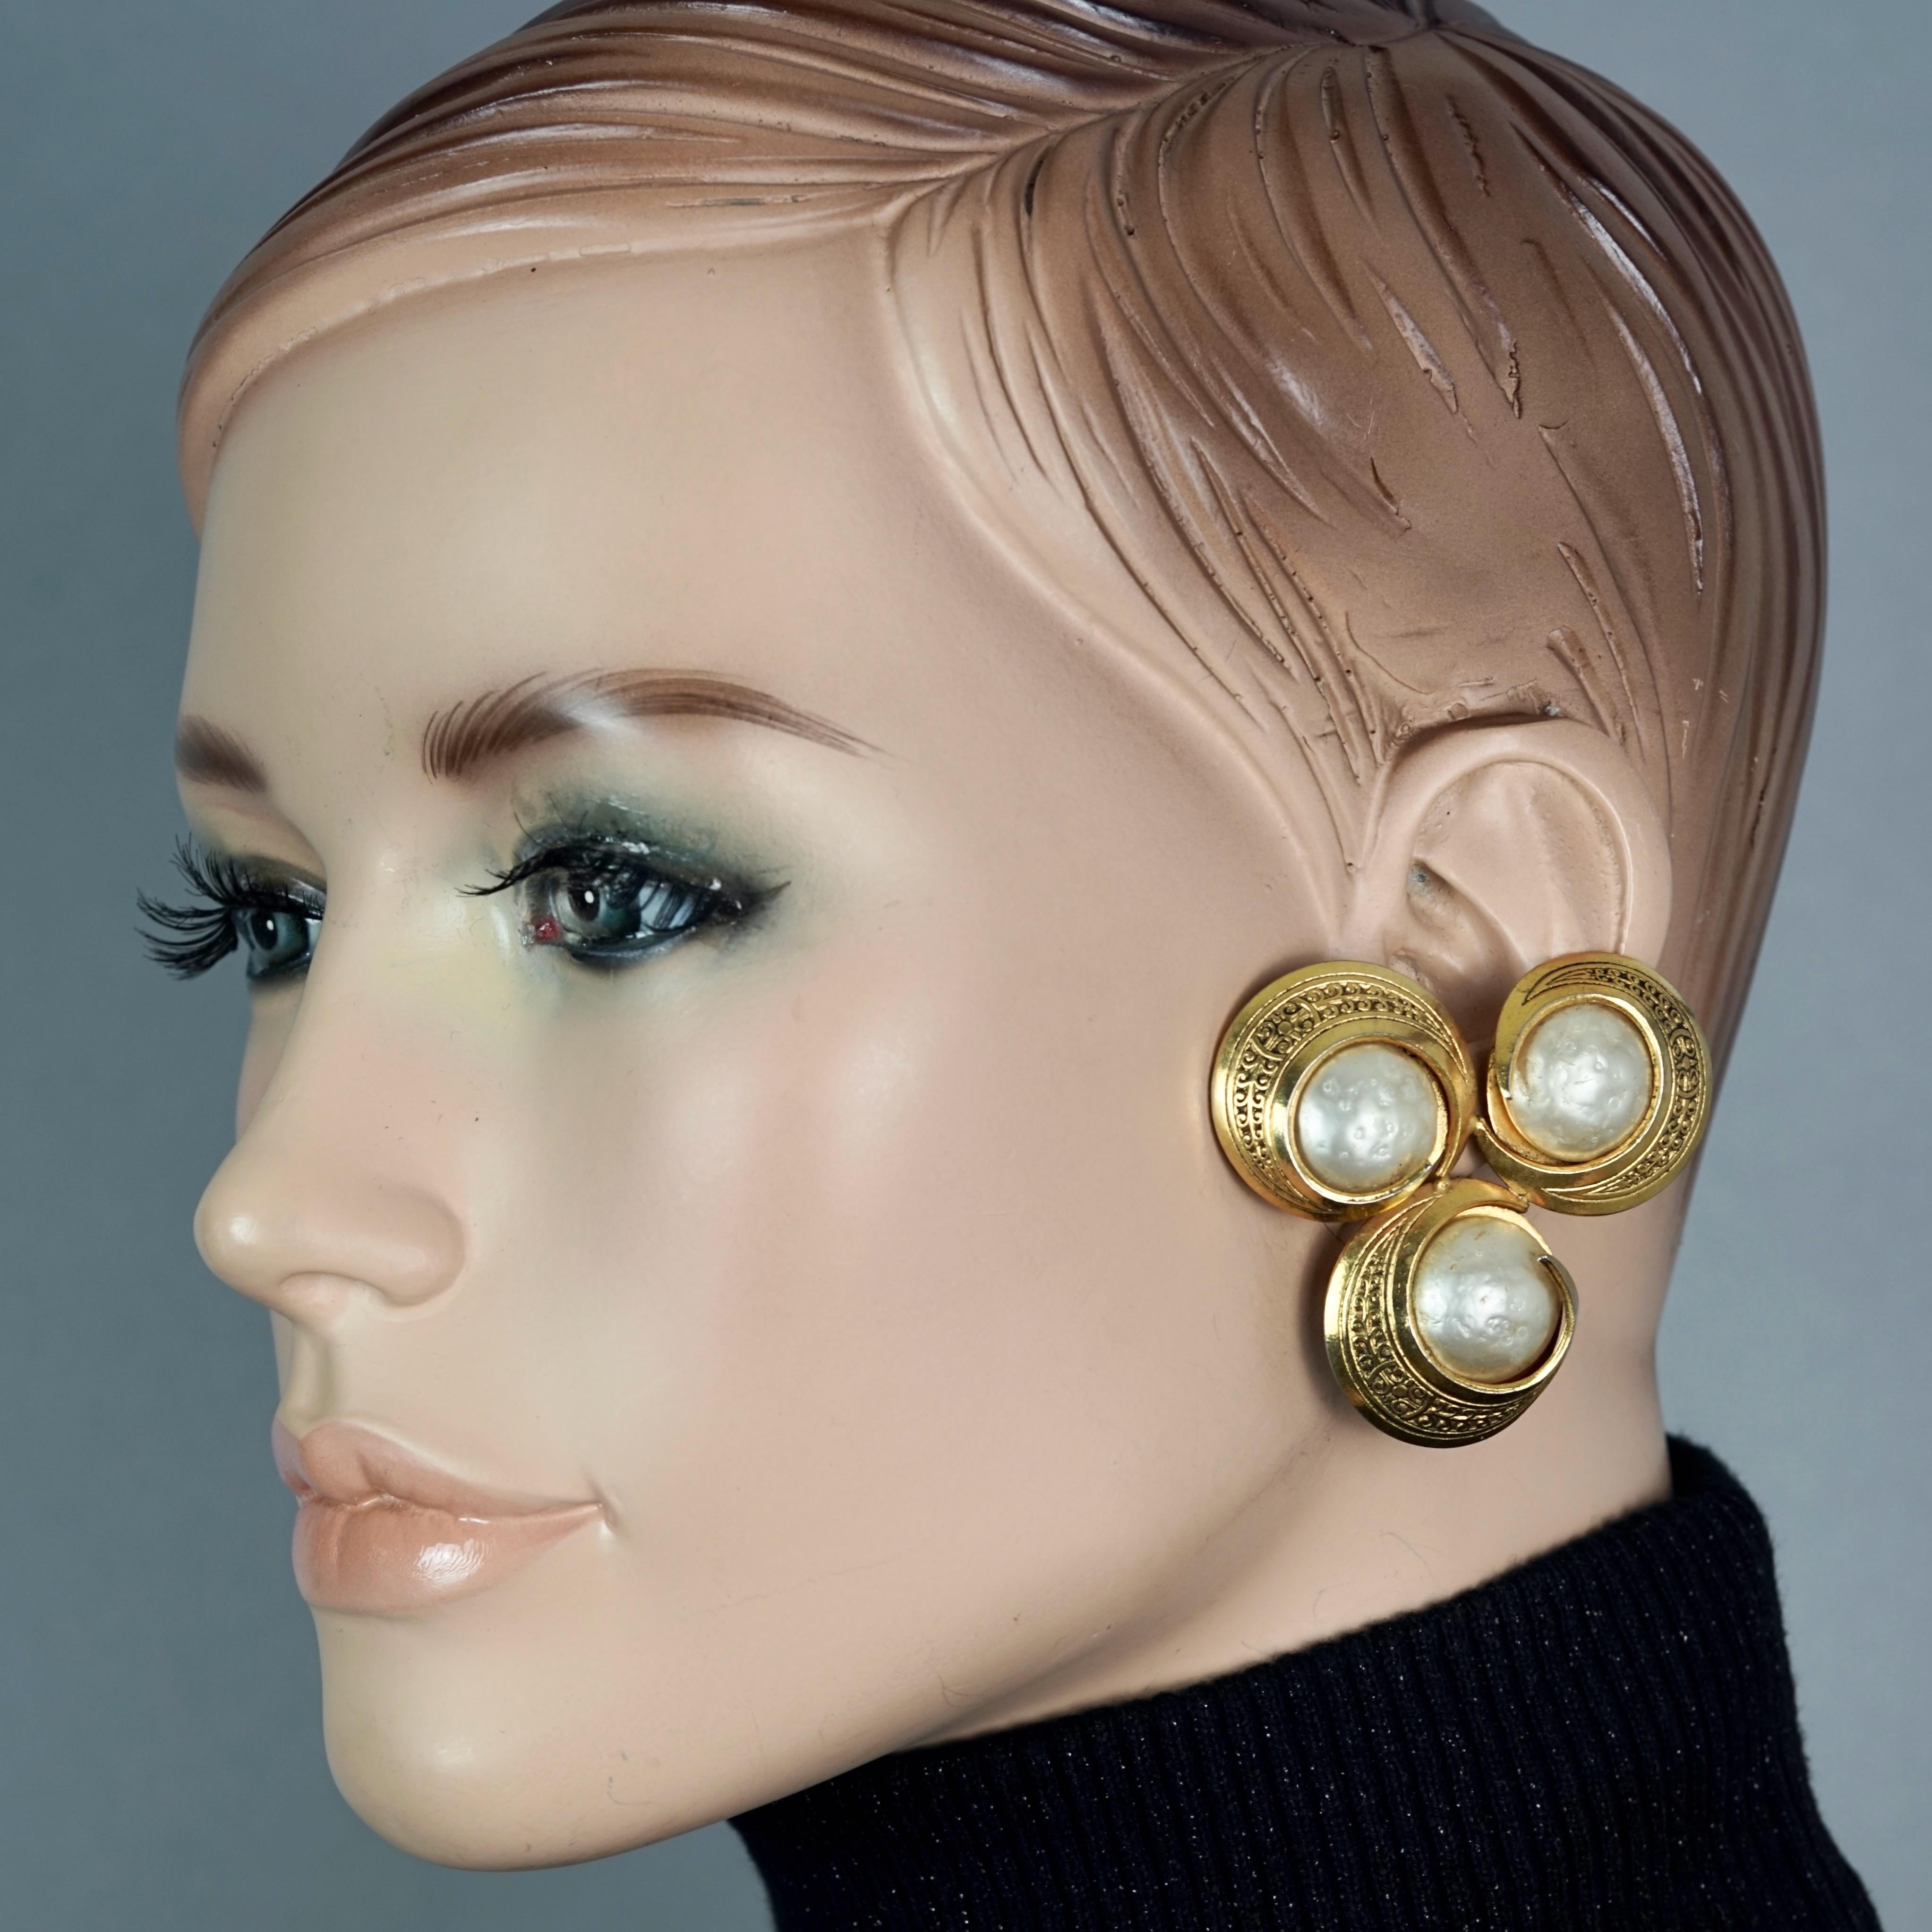 Vintage Massive MERCEDES ROBIROSA Triple Textured Pearls Disc Earrings

Measurements:
Height: 1.97 inches (5 cm)
Width: 2.12 inches (5.4 cm)
Weight per Earring: 29 grams

Features:
- 100% Authentic MERCEDES ROBIROSA.
- Massive triple textured pearls